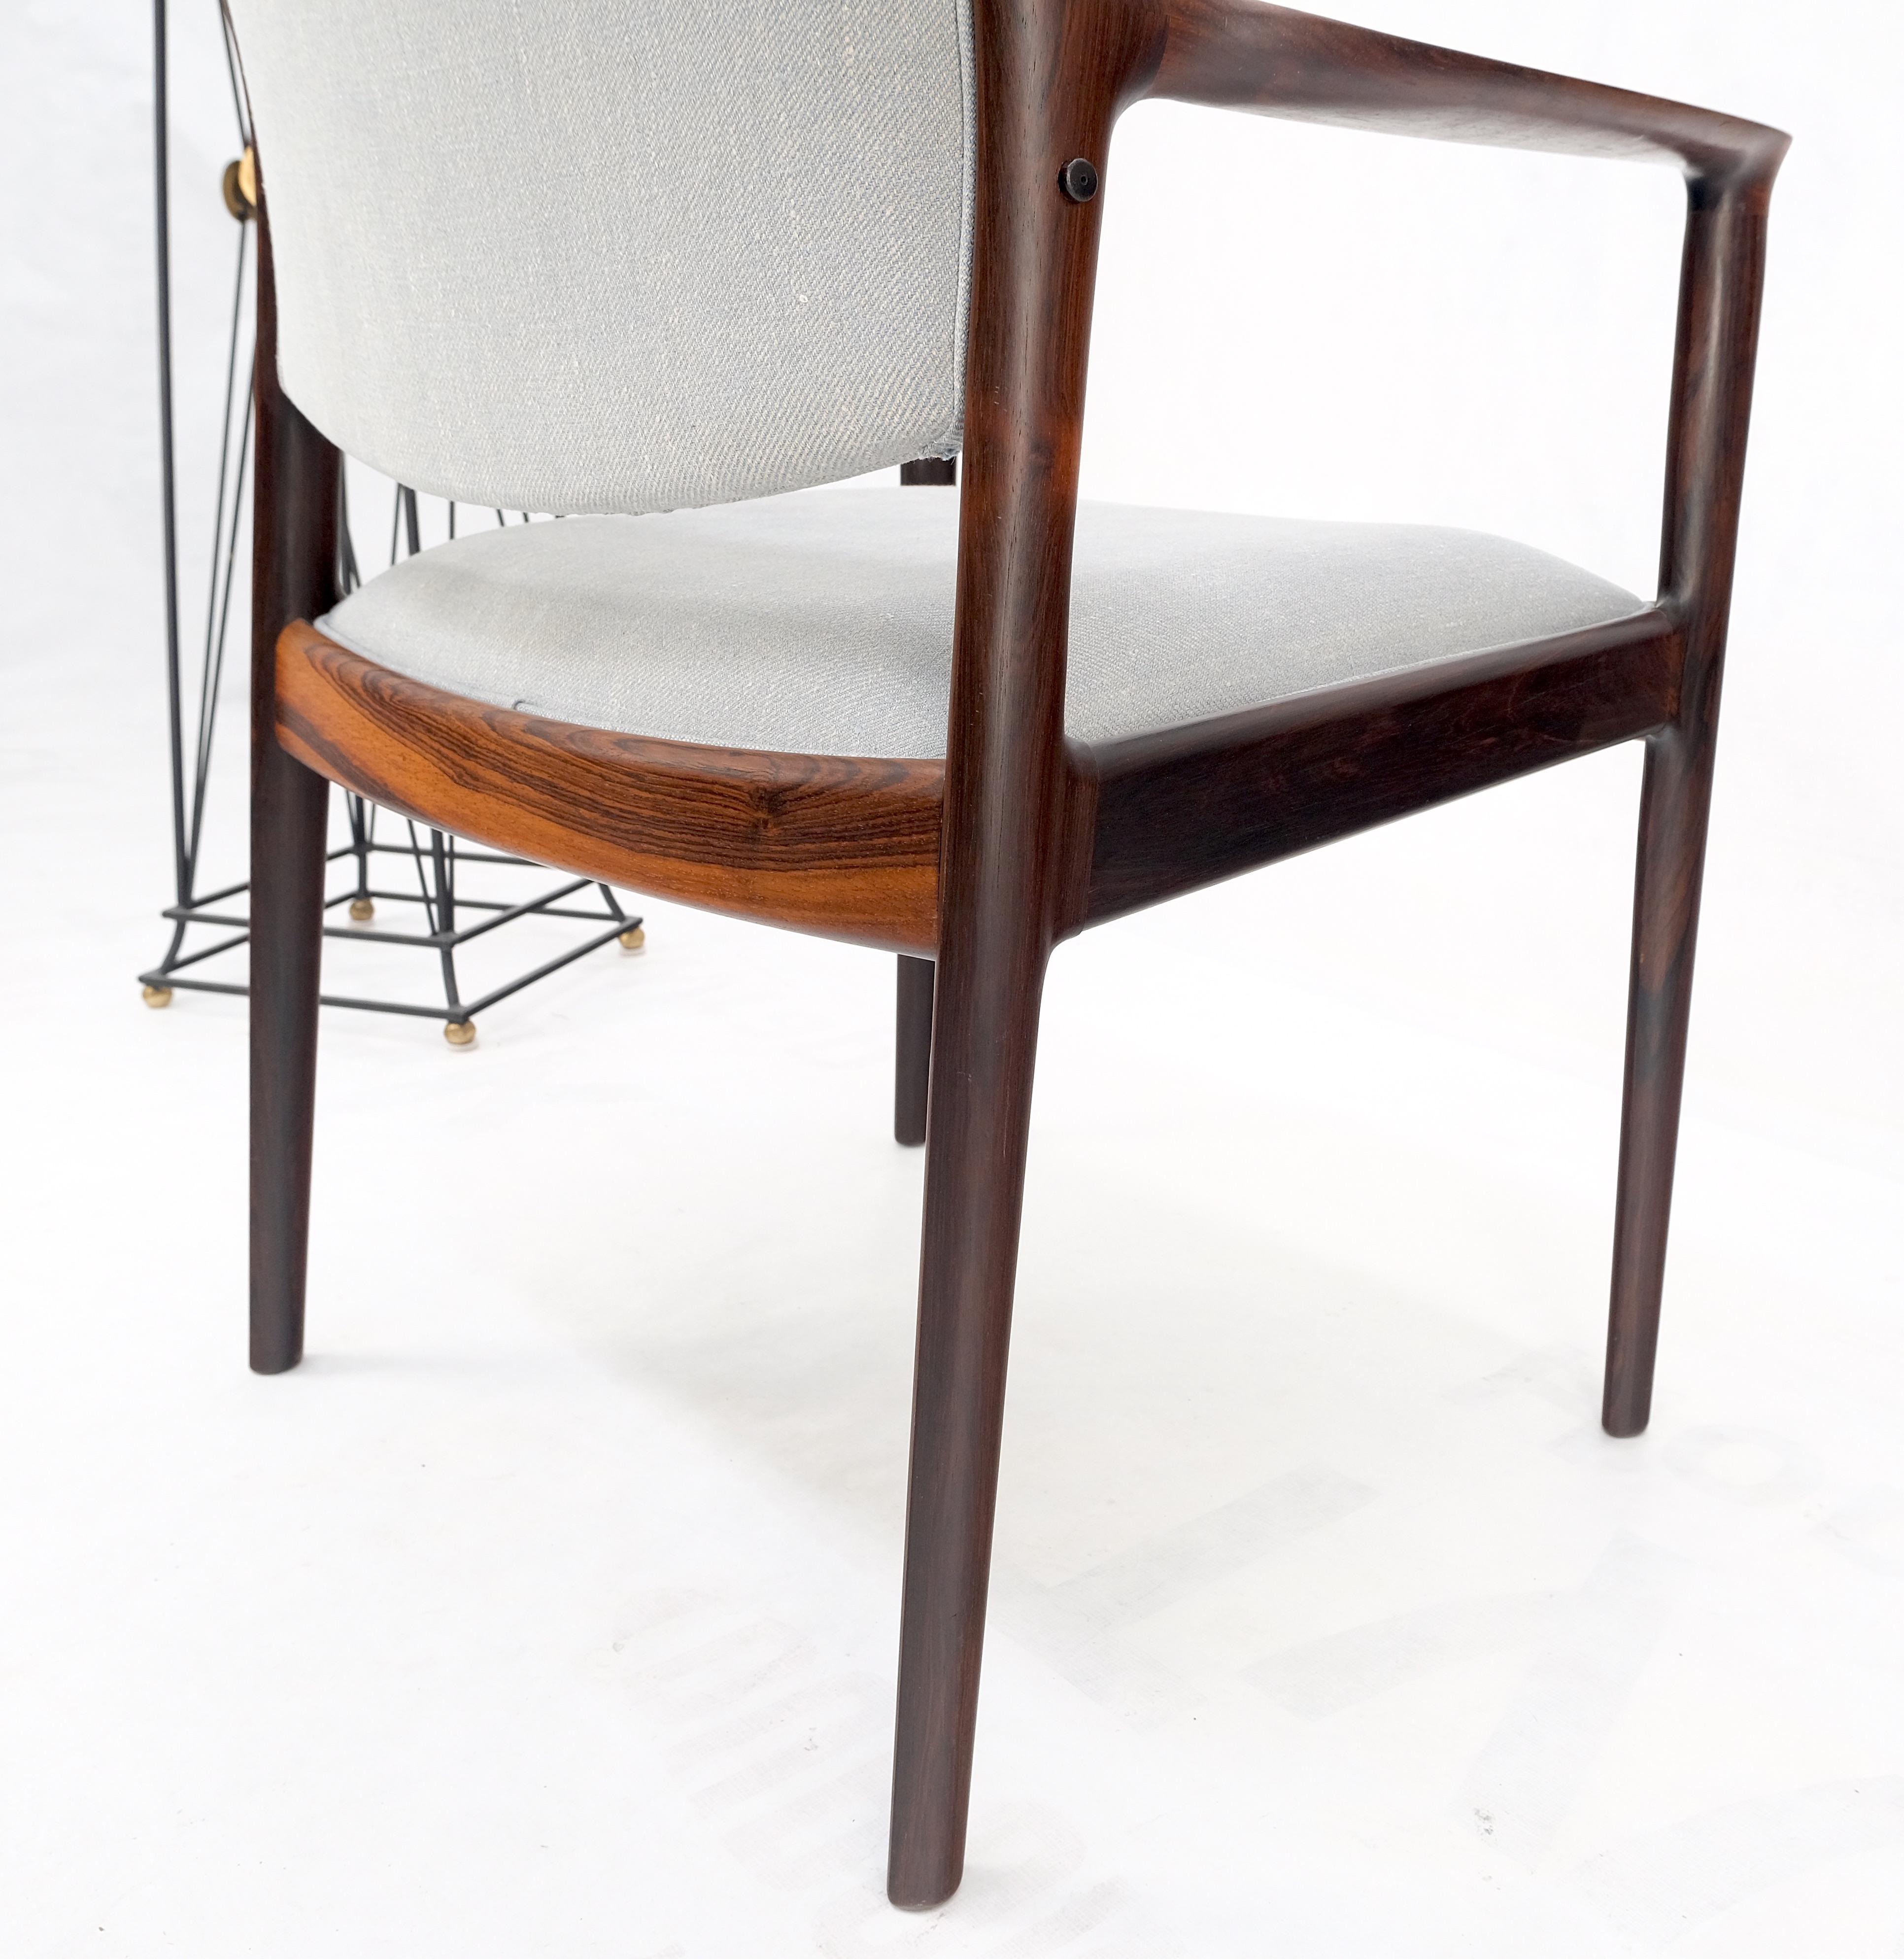 Finn Juhl Attributed Heavy Solid Rosewood Arm Desk Chair New Upholstery Mint! For Sale 1